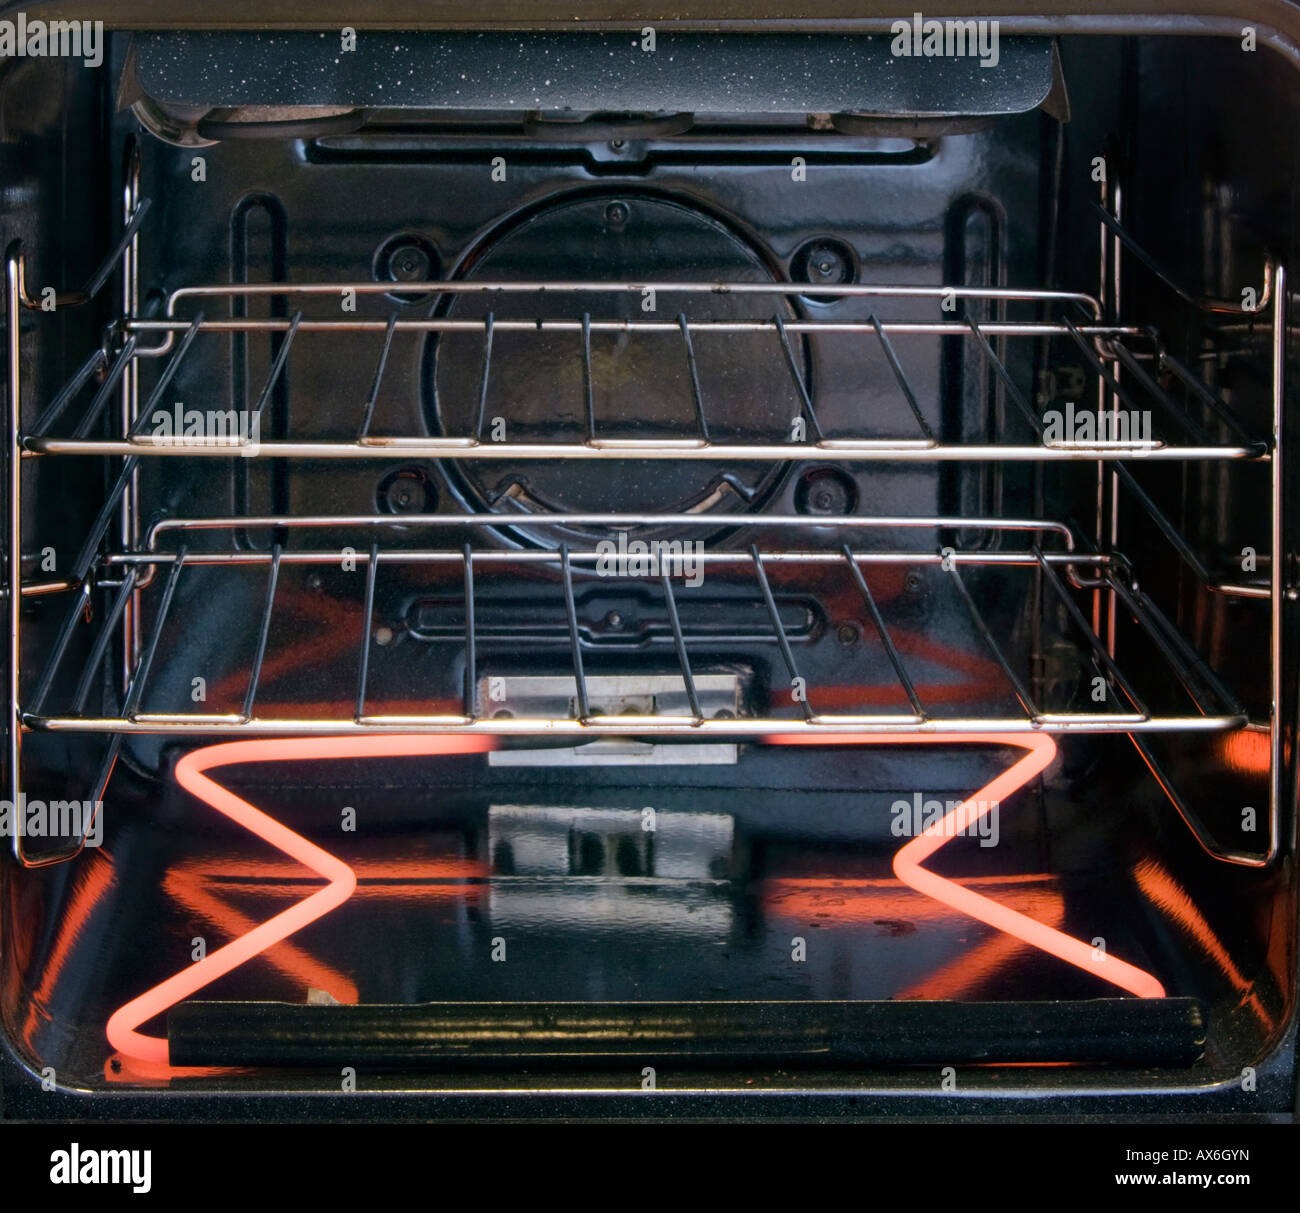 https://c8.alamy.com/comp/AX6GYN/the-inside-of-an-electric-oven-with-the-element-glowing-red-AX6GYN.jpg